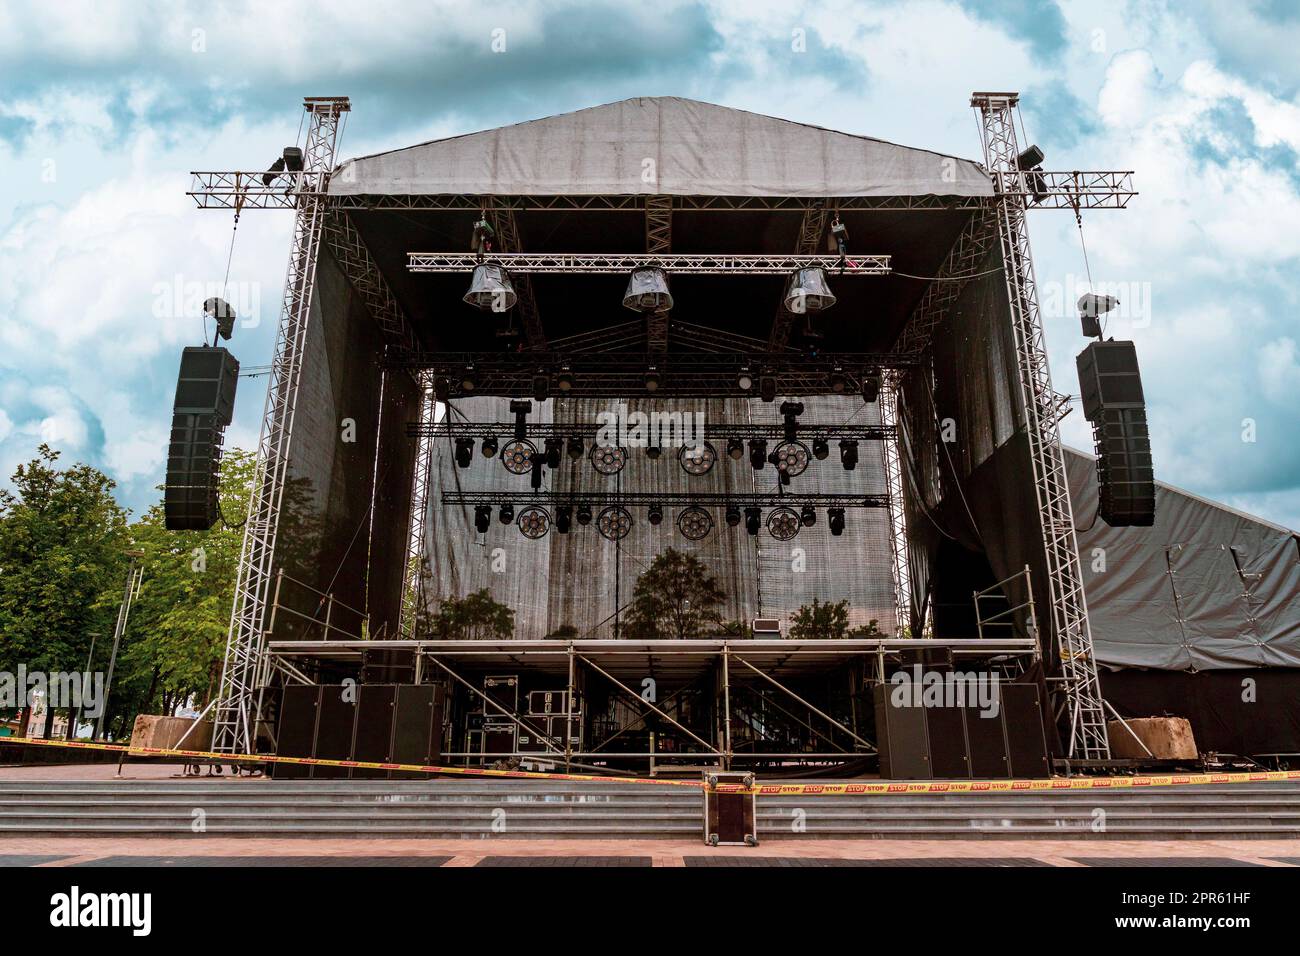 Outdoor concert venue stage and lighting Stock Photo